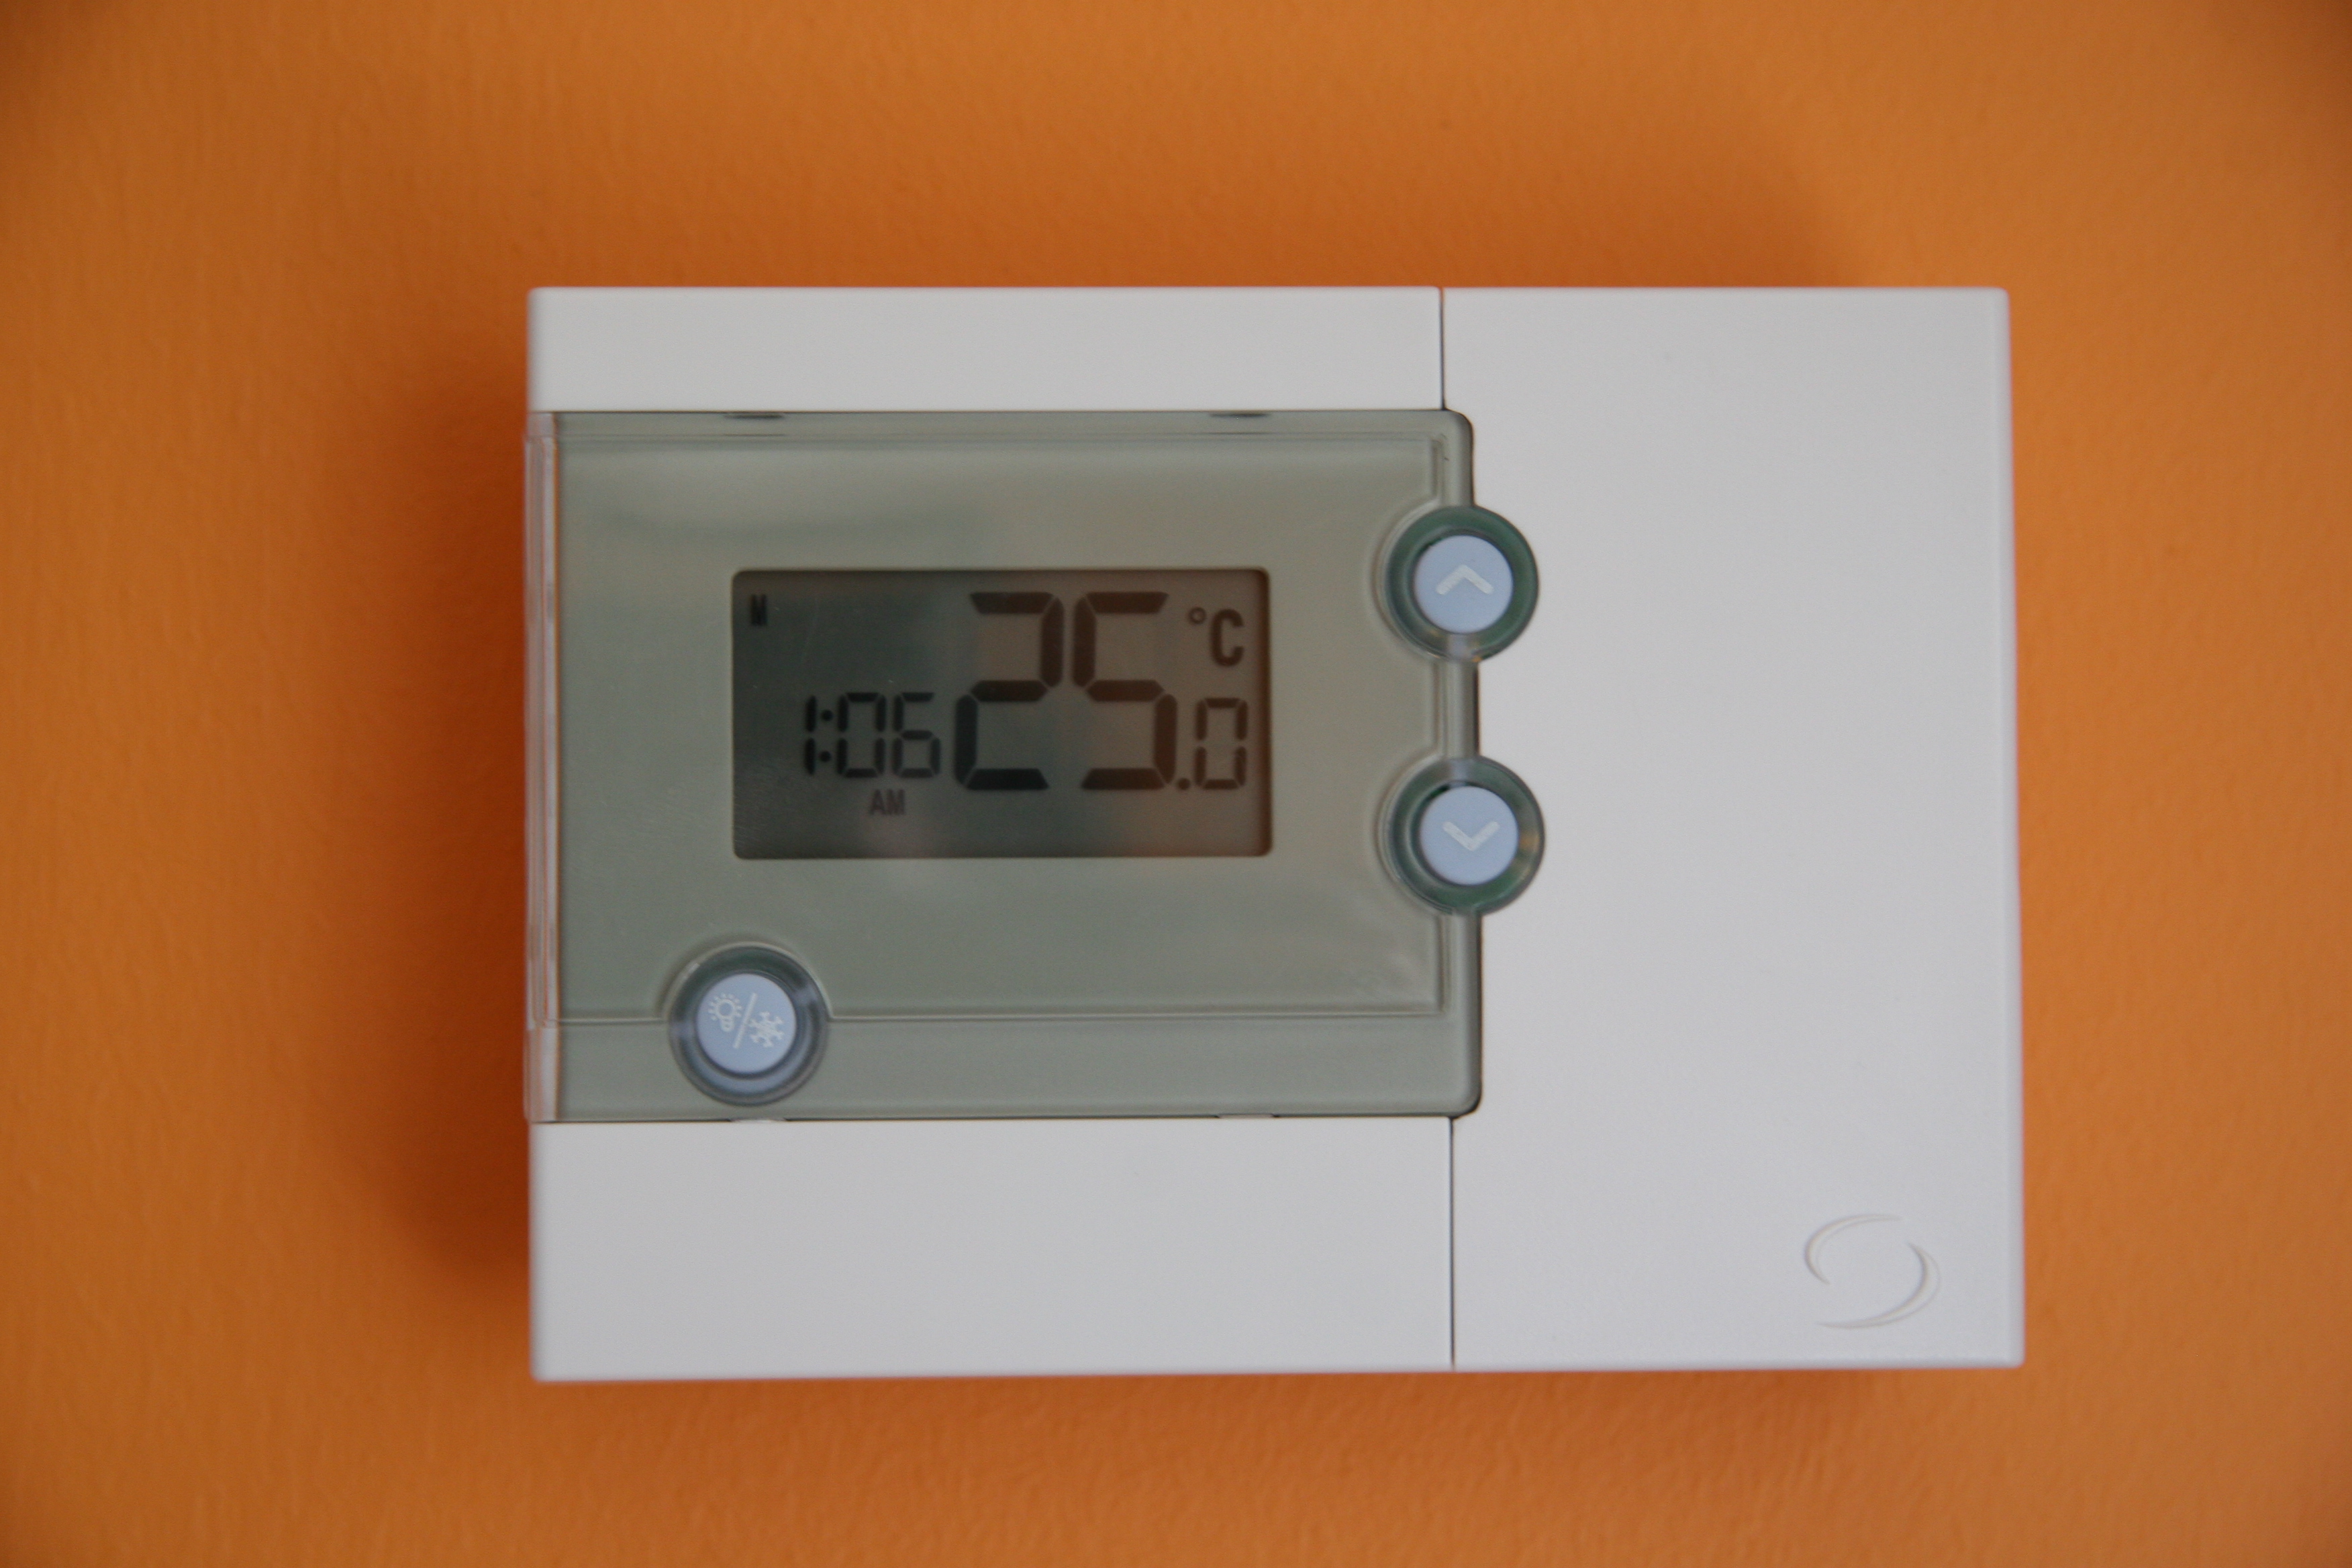 Ecopower Heating Controller Installation Guide